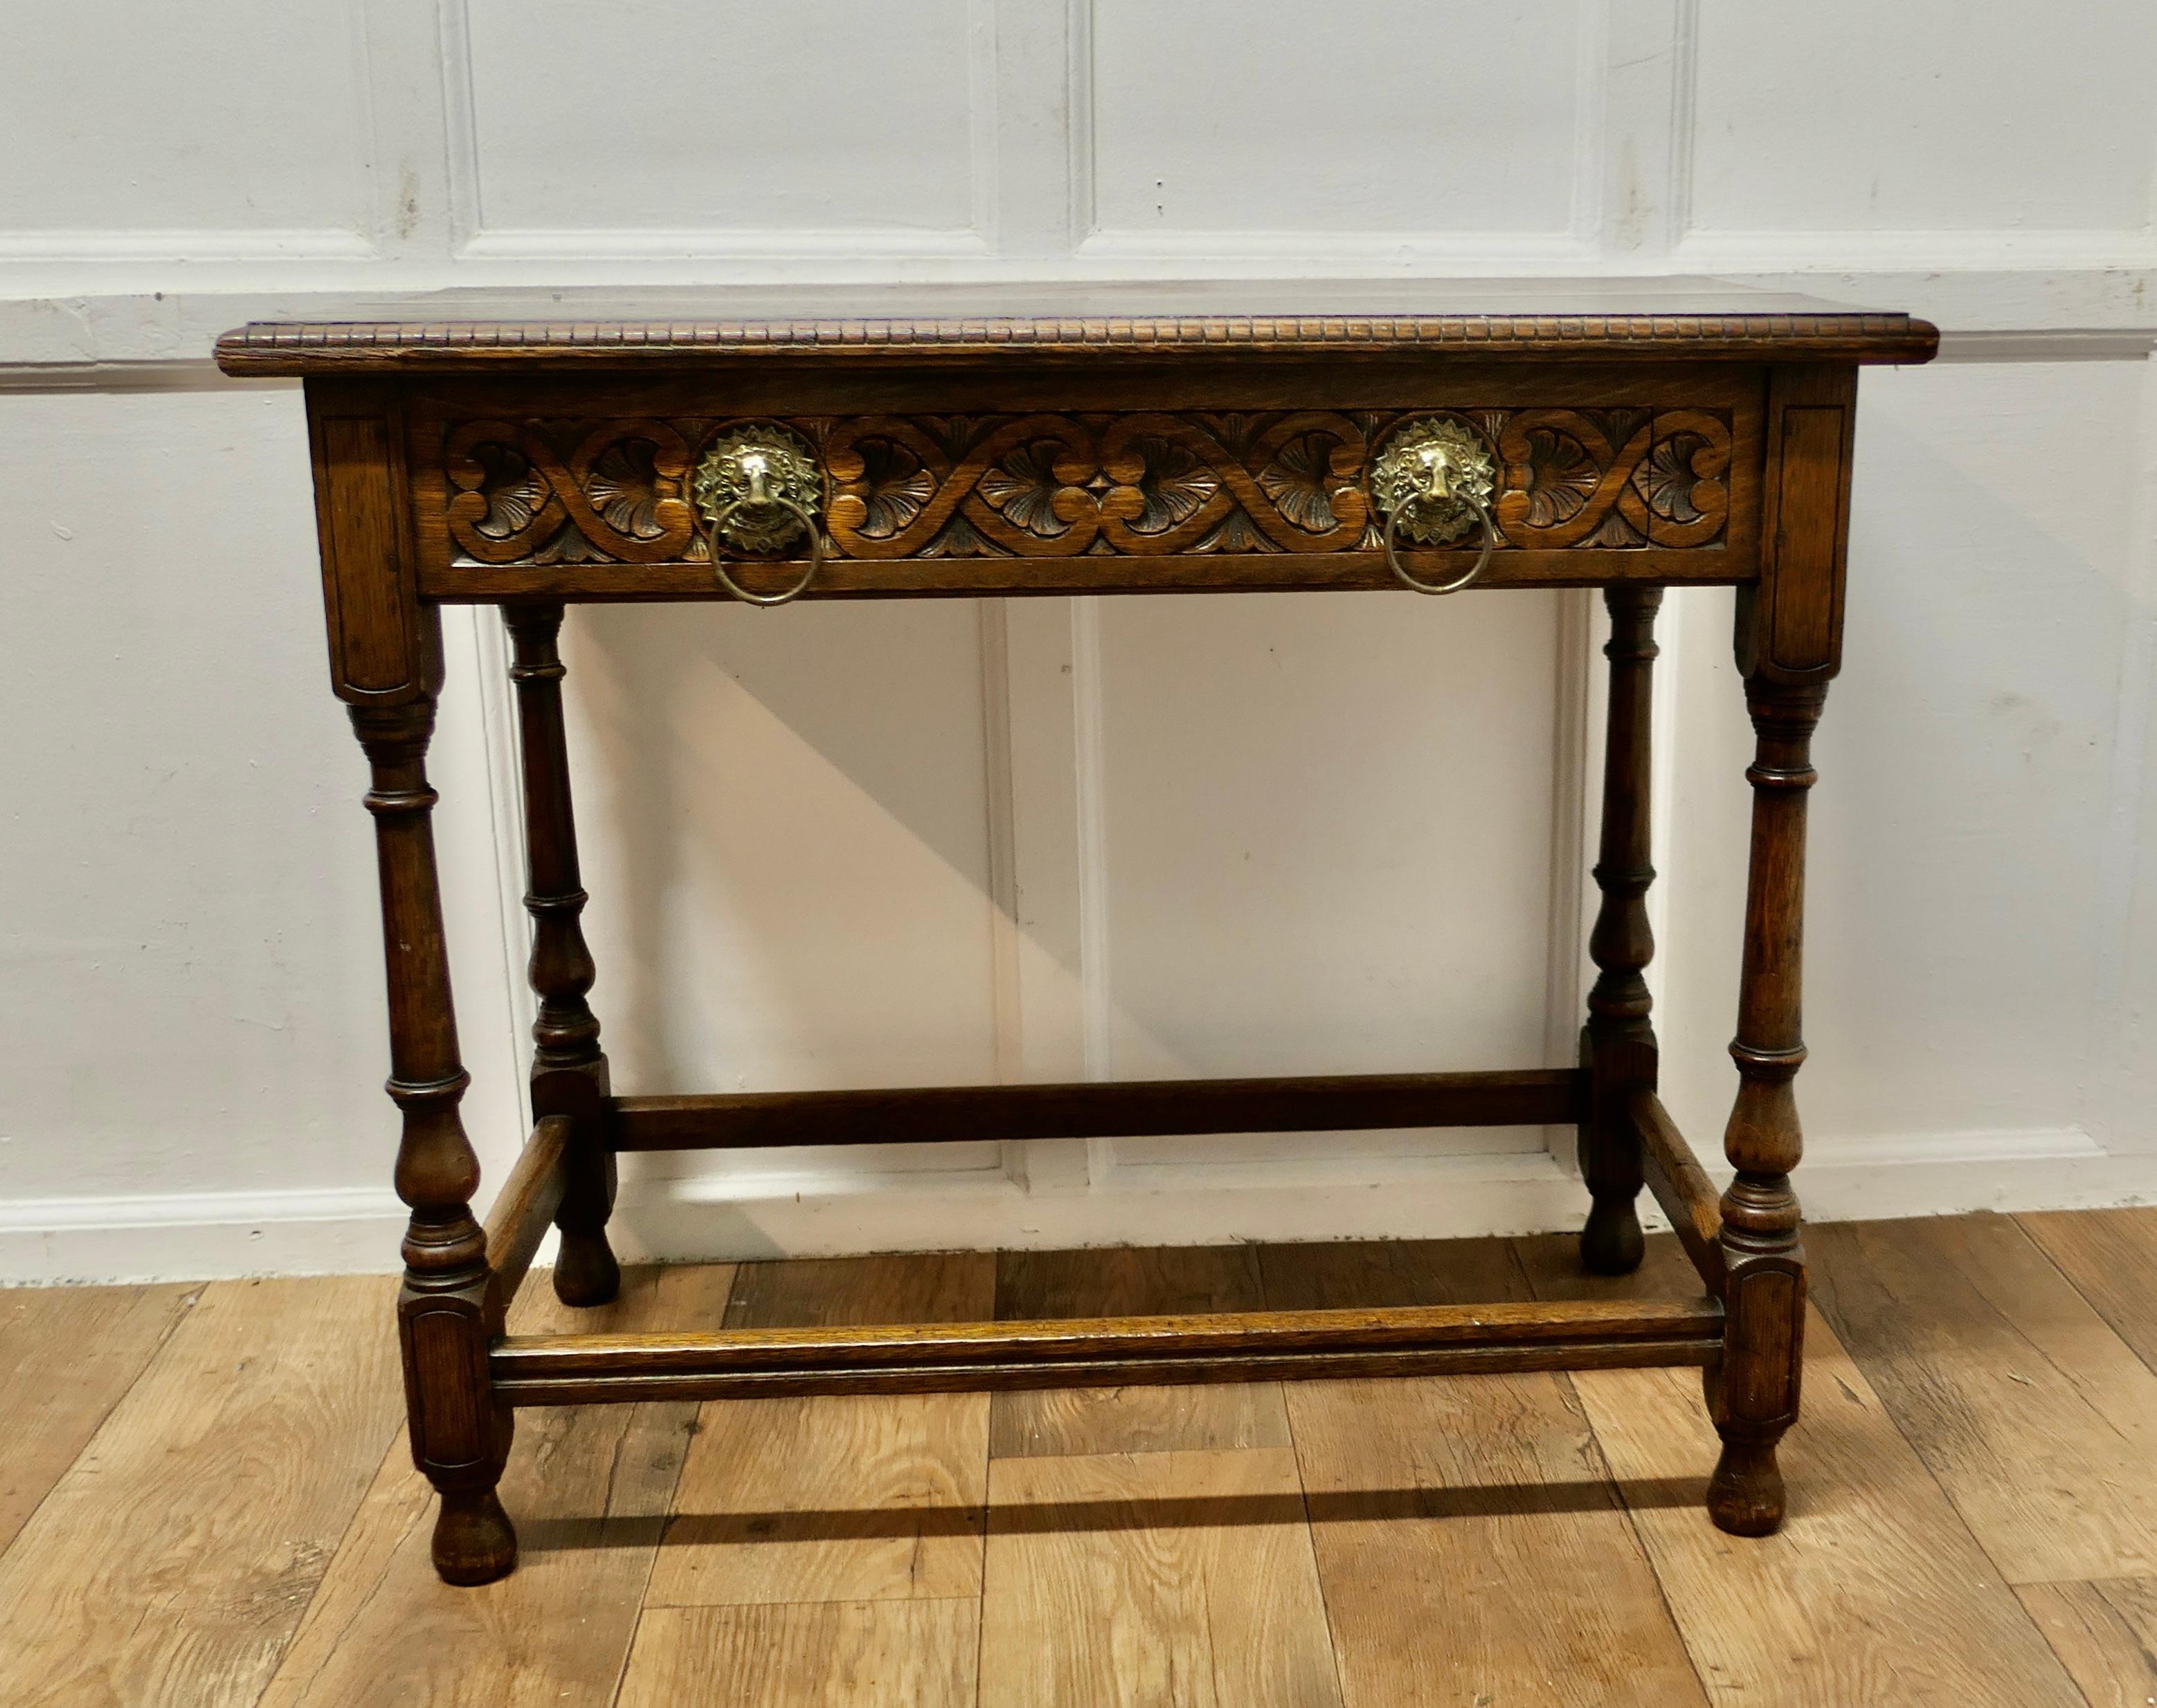 Celtic Carved Oak Occasional Table
 
A particularly fine quality Occasional Table, it has a dentil carved detail along the top edge and a long drawer which has Celtic carving along the front and is set with 2 stunning Lion’s mask ring handles which